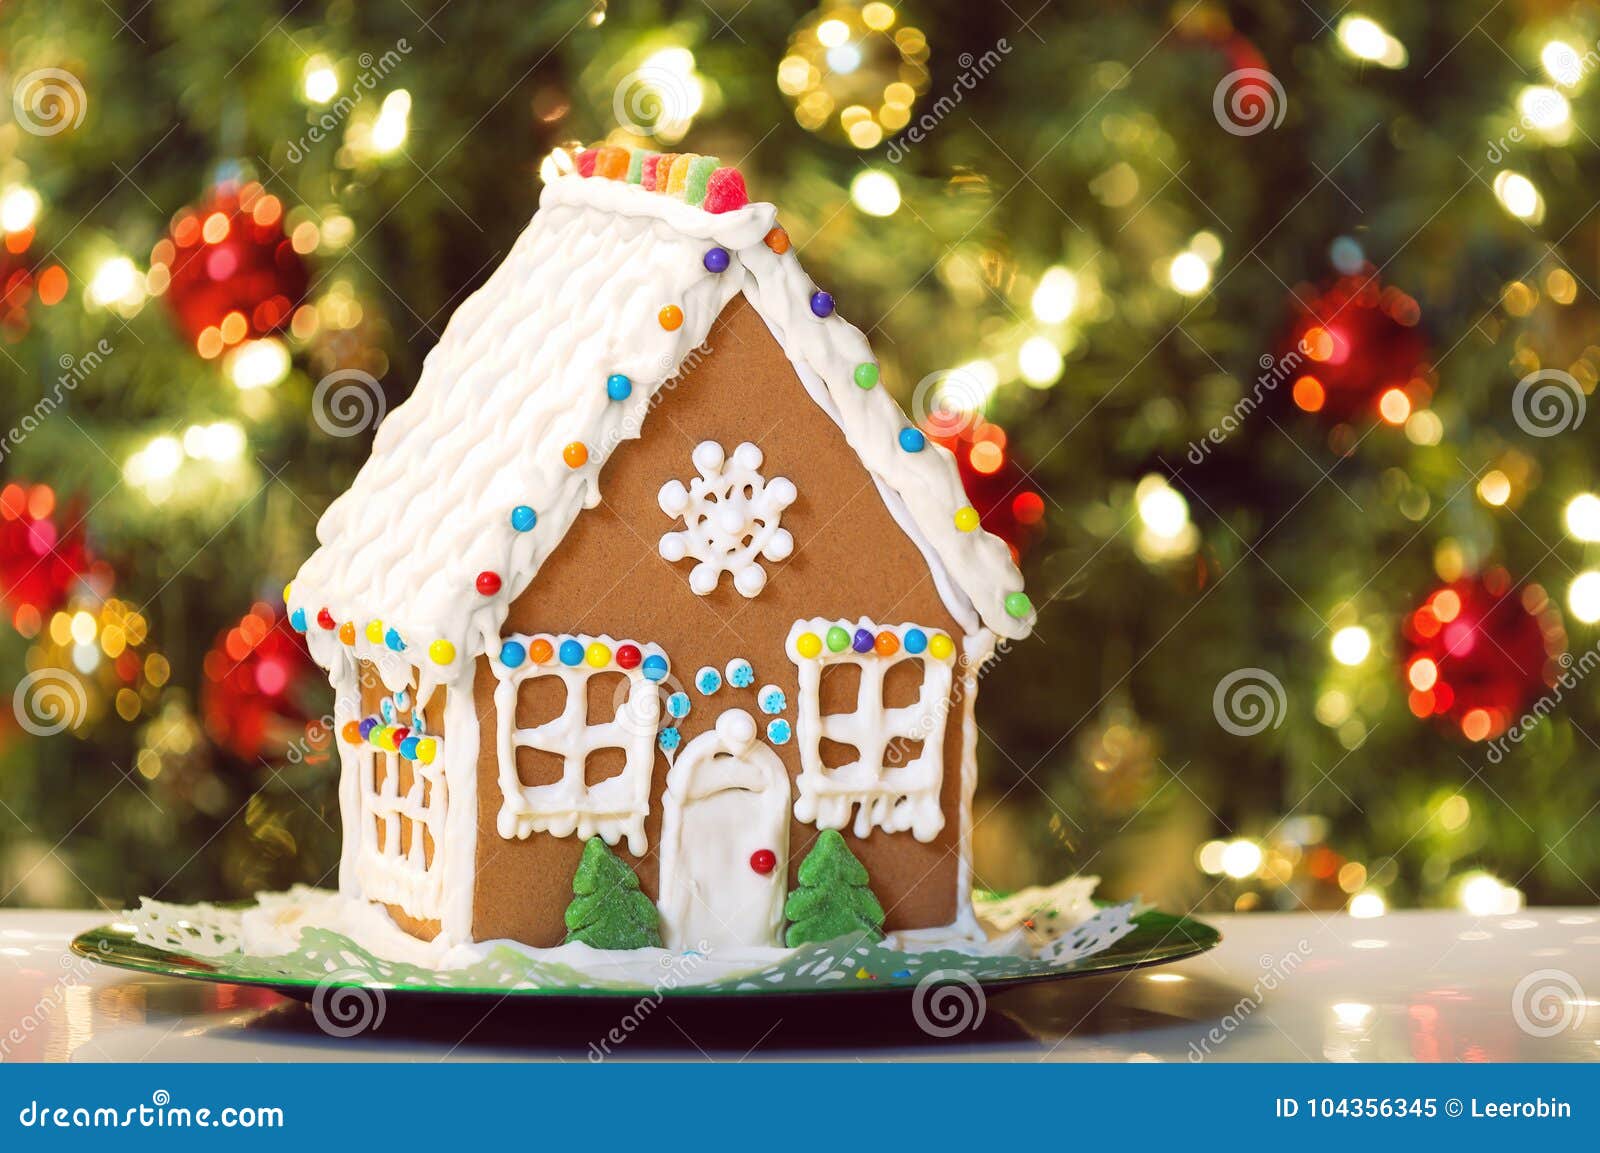 Download Gingerbread House And Christmas Tree Stock Image Image of season colorful